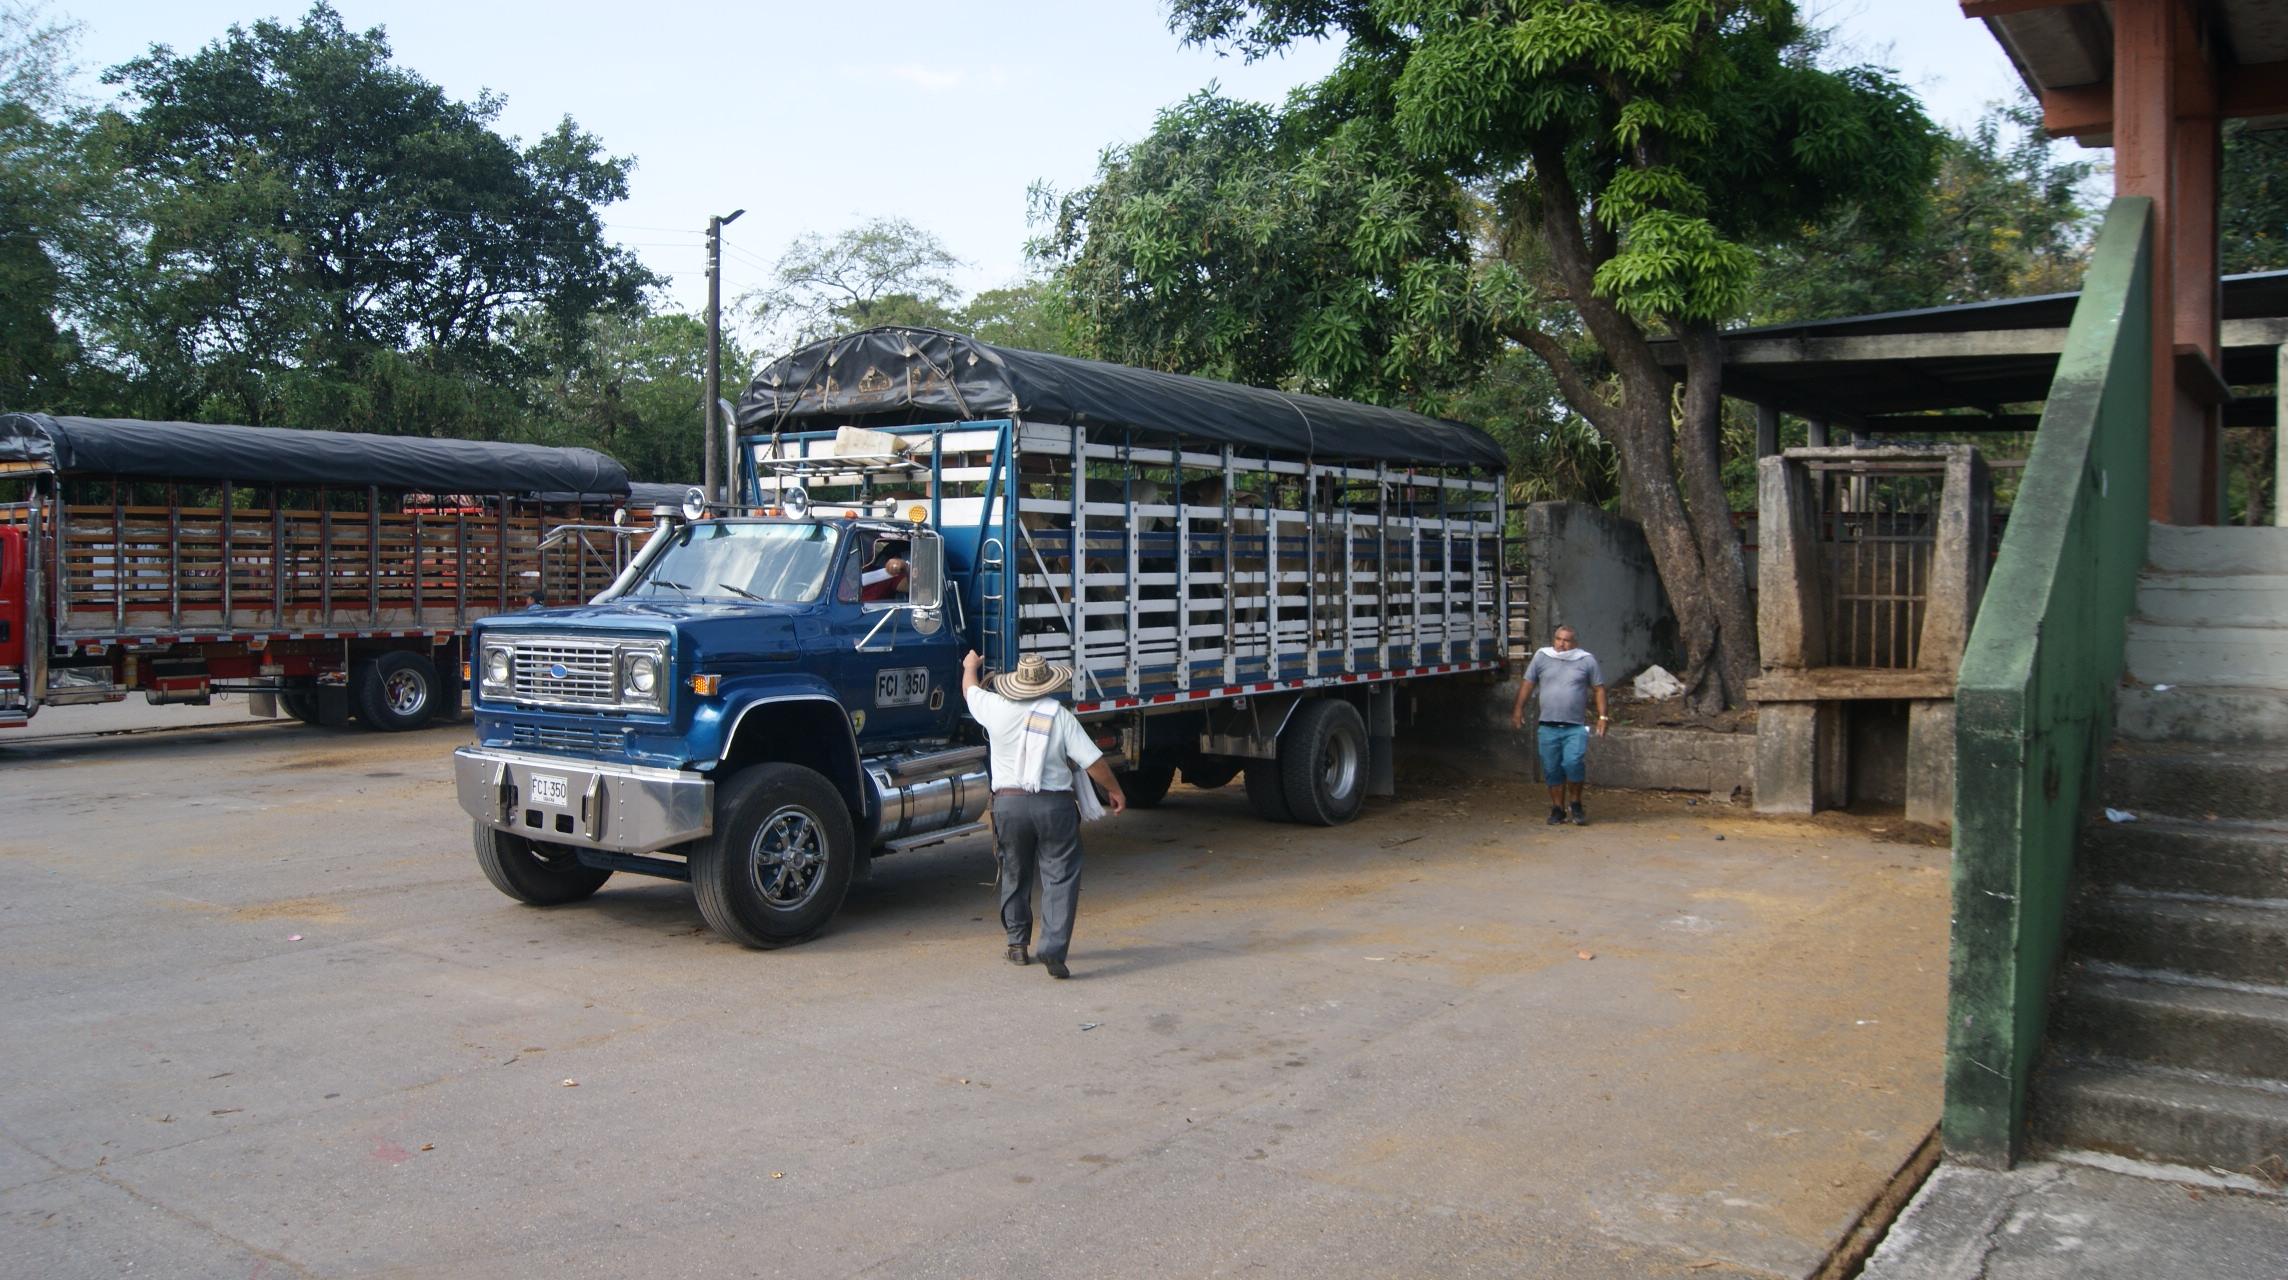 A man in a sombrero-style hat and white shirt walks up to a blue truck loaded with cattle that can be seen through the metal fencing.